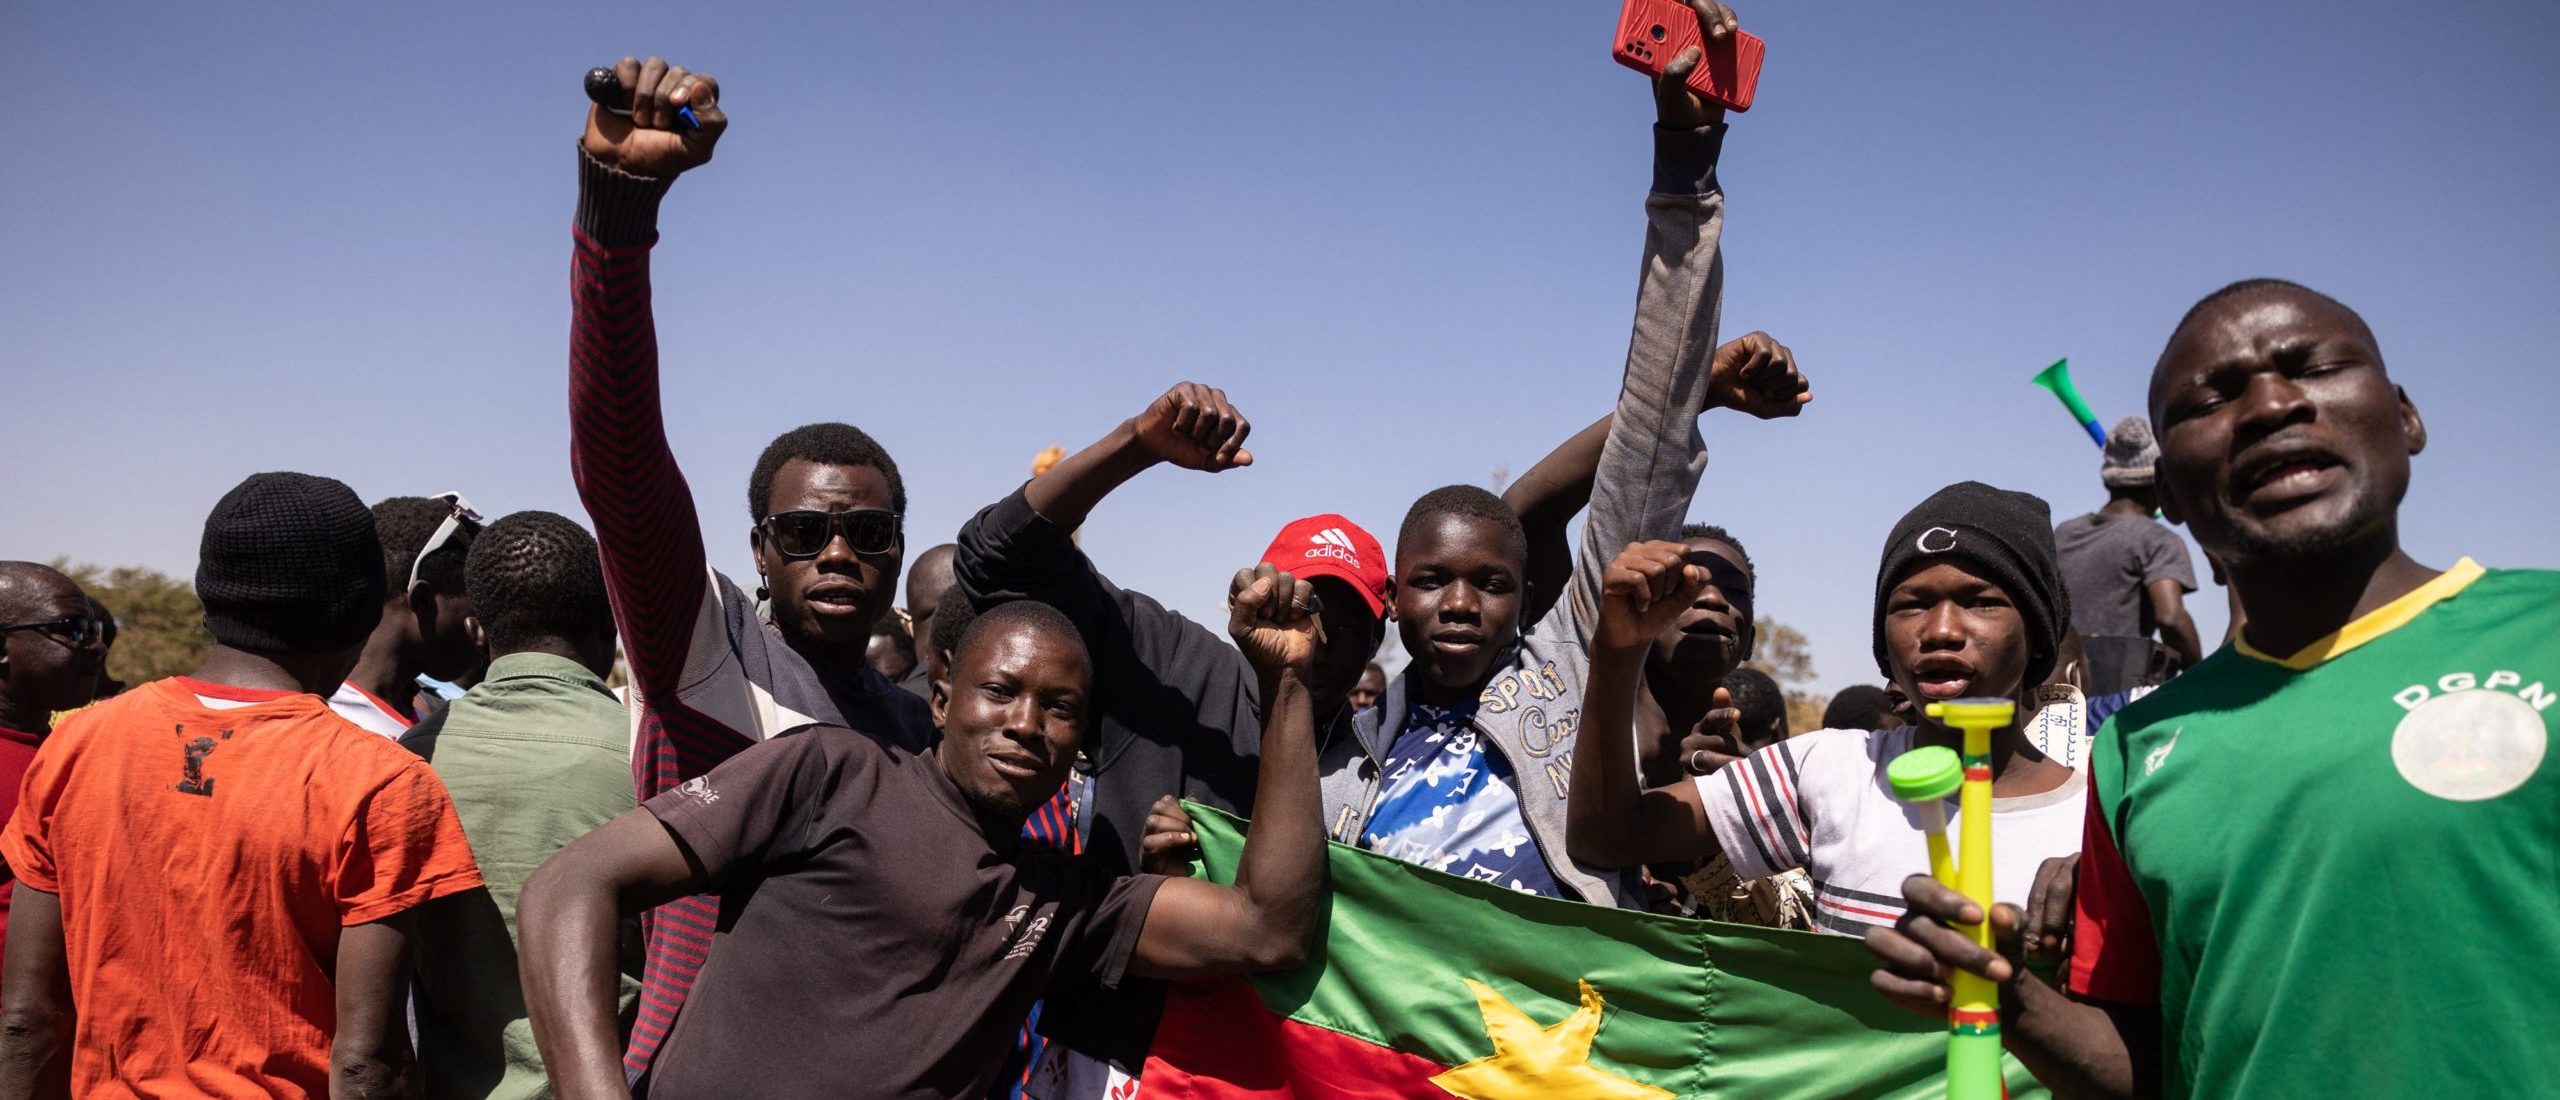 Soldiers Engage In Mutiny, Detain President Of Burkina Faso After Battle At Palace